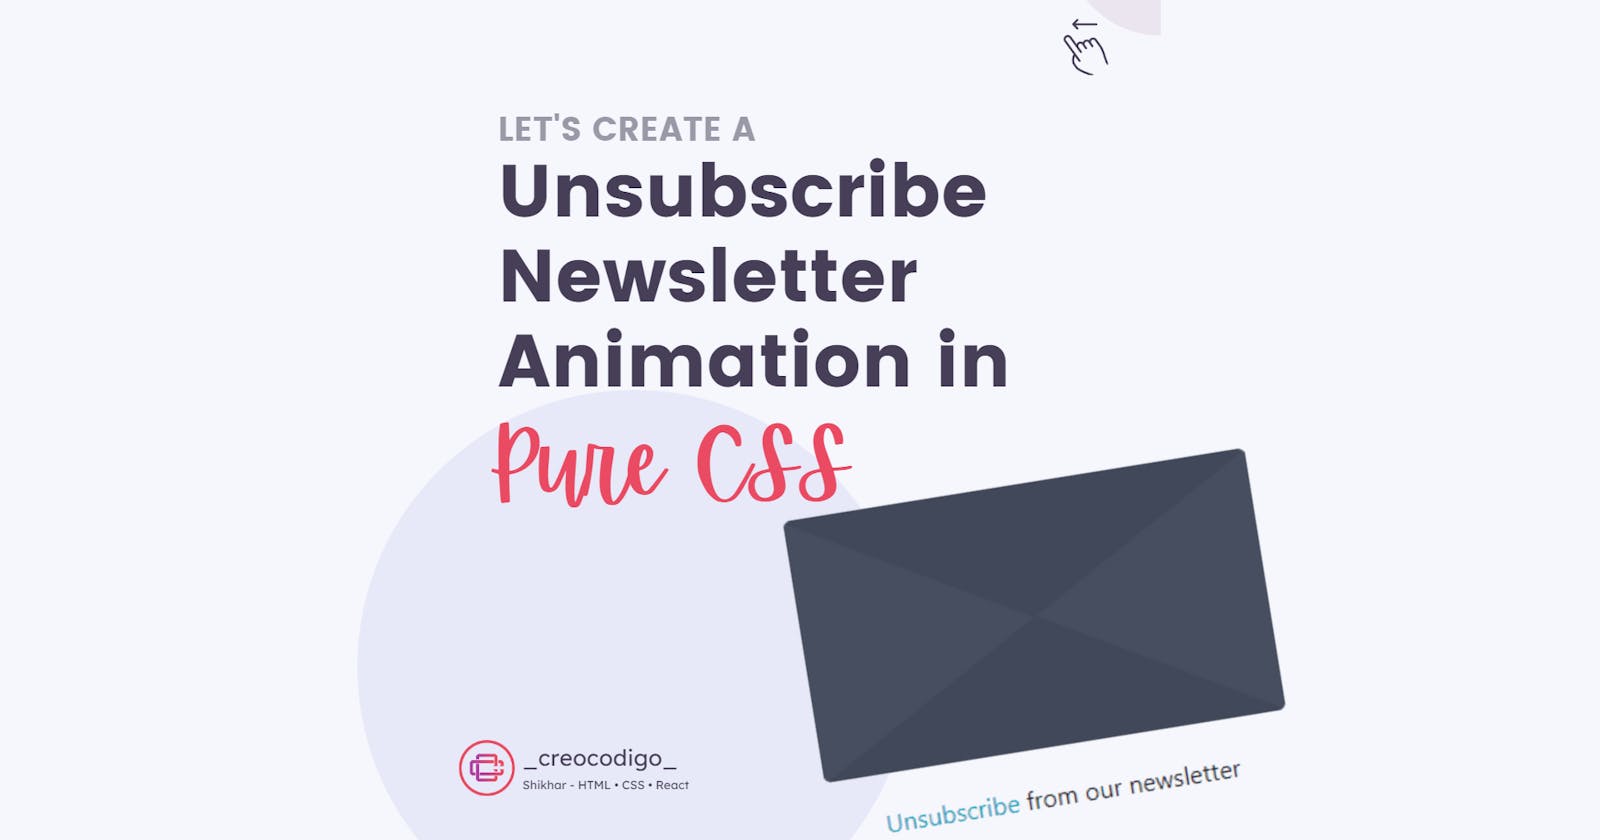 Unsubscribe Newsletter Animation in Pure CSS